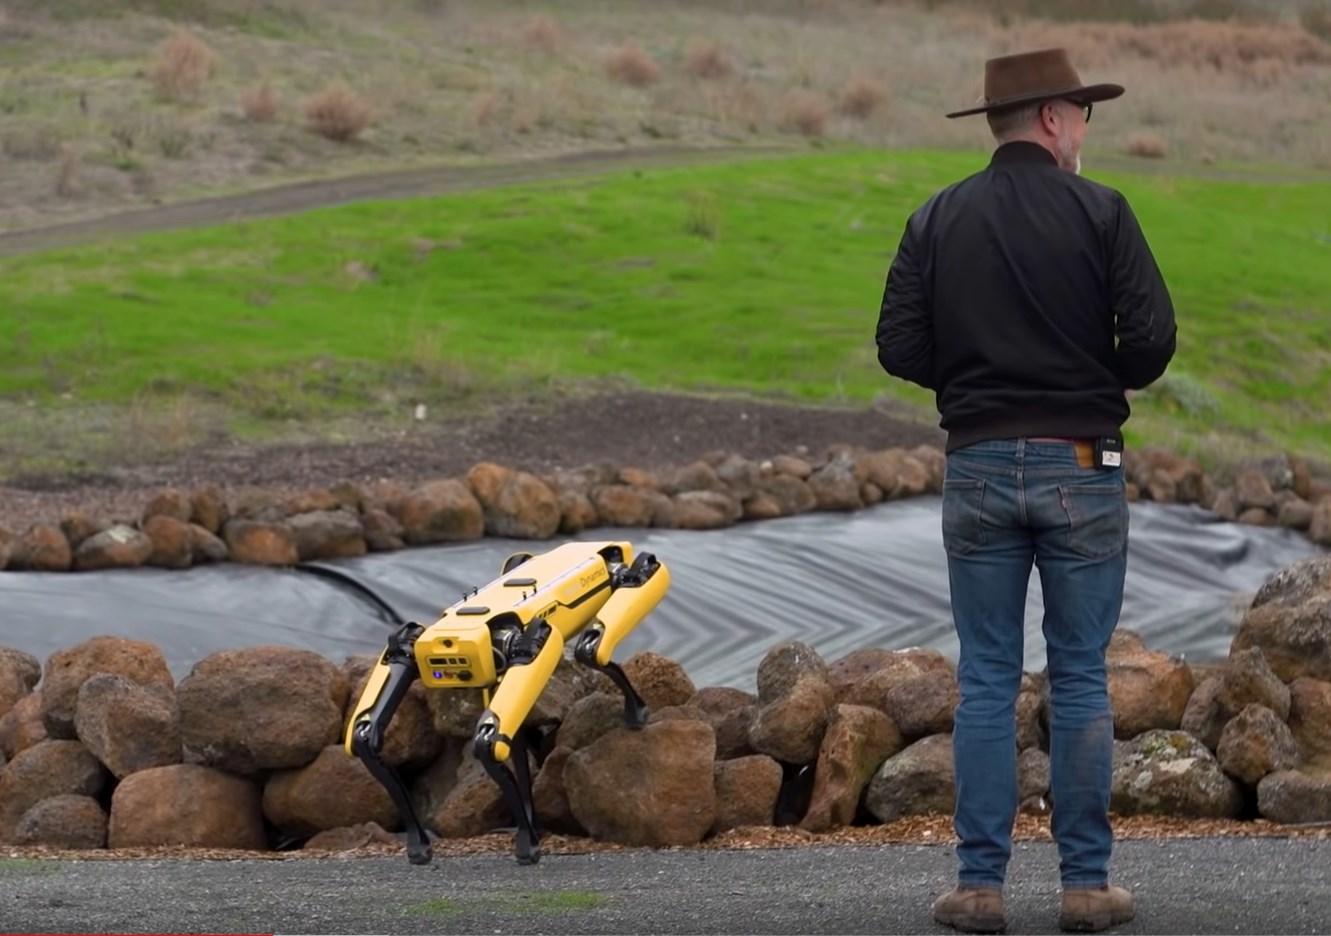 Adam Savage standing outside with the Boston Dynamics robot dog.